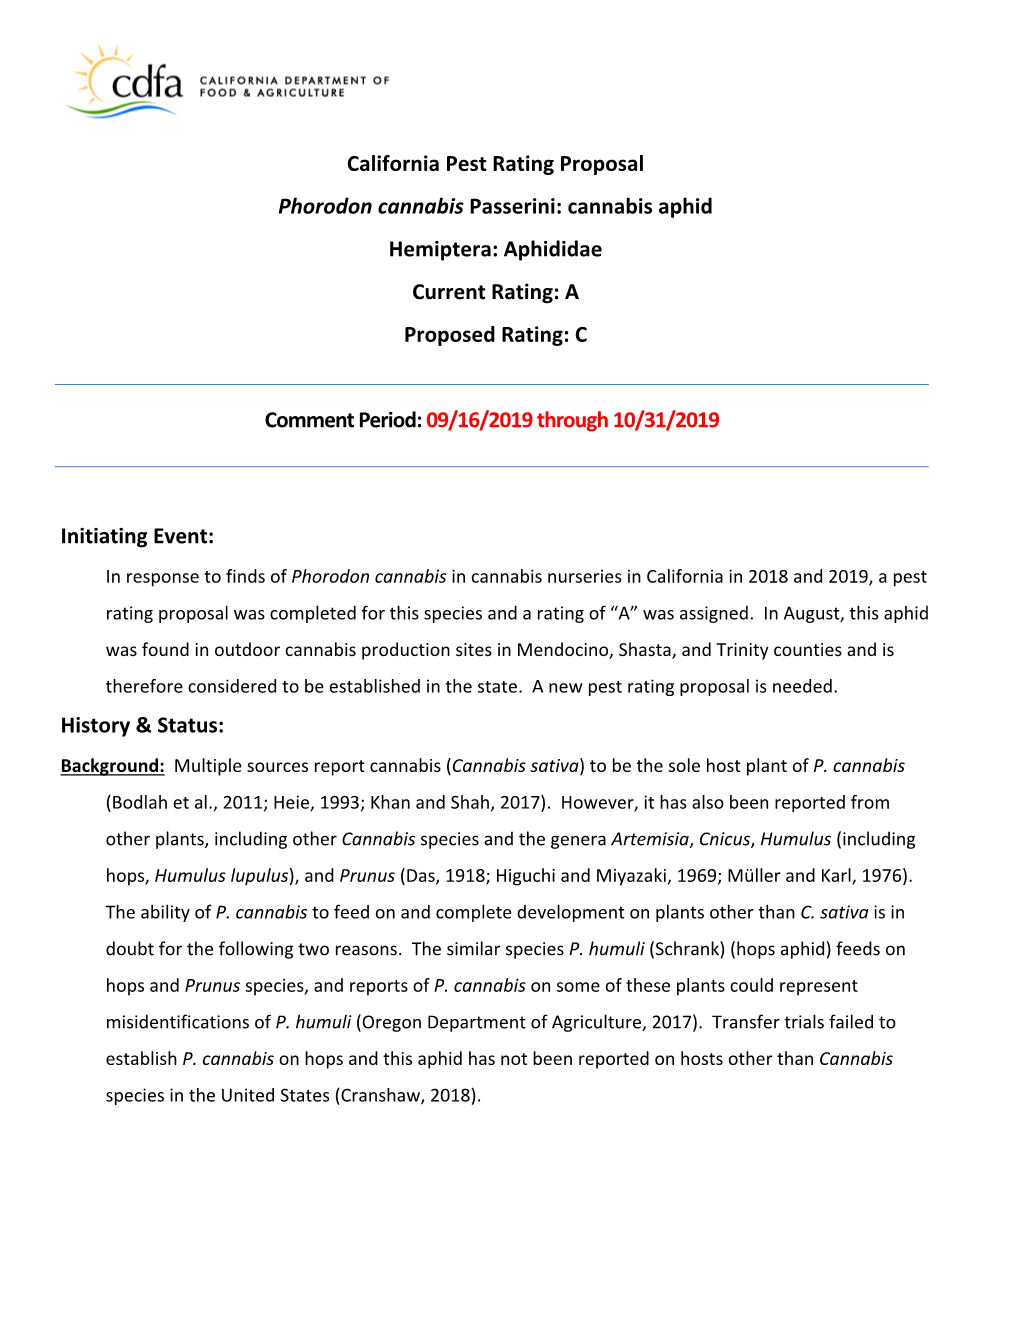 California Pest Rating Proposal Phorodon Cannabis Passerini: Cannabis Aphid Hemiptera: Aphididae Current Rating: a Proposed Rating: C